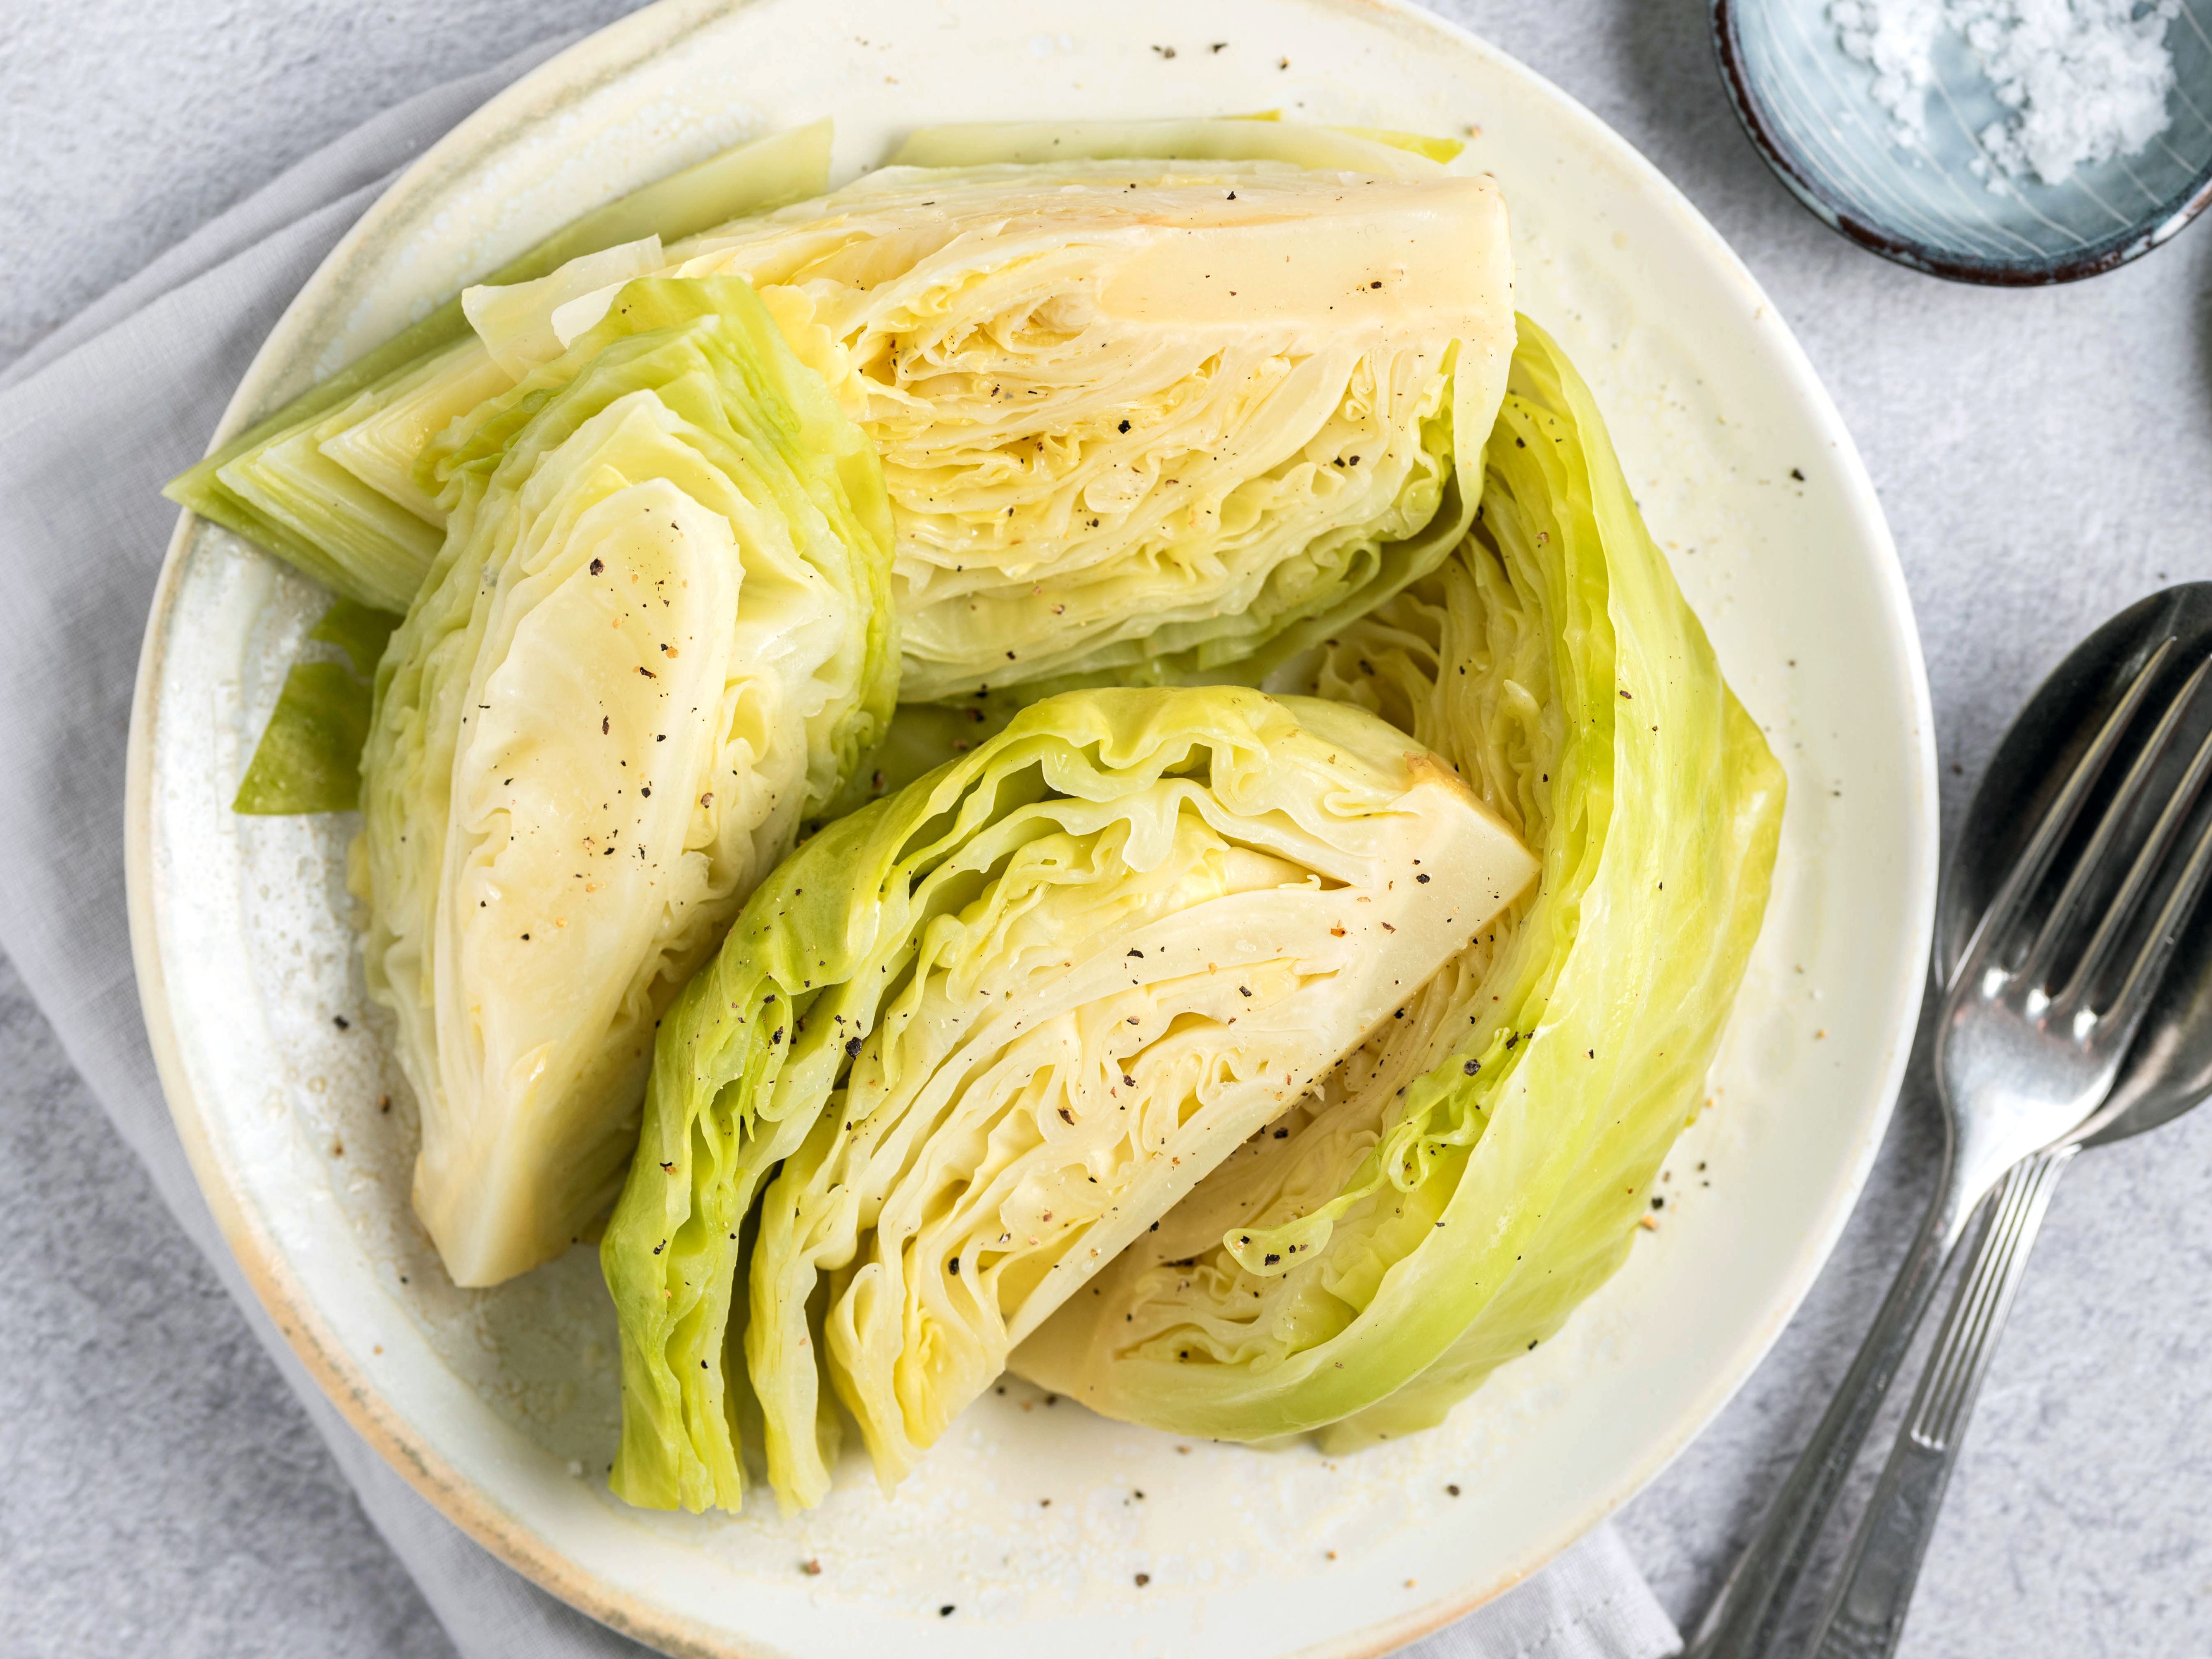 What does cooked cabbage taste like?